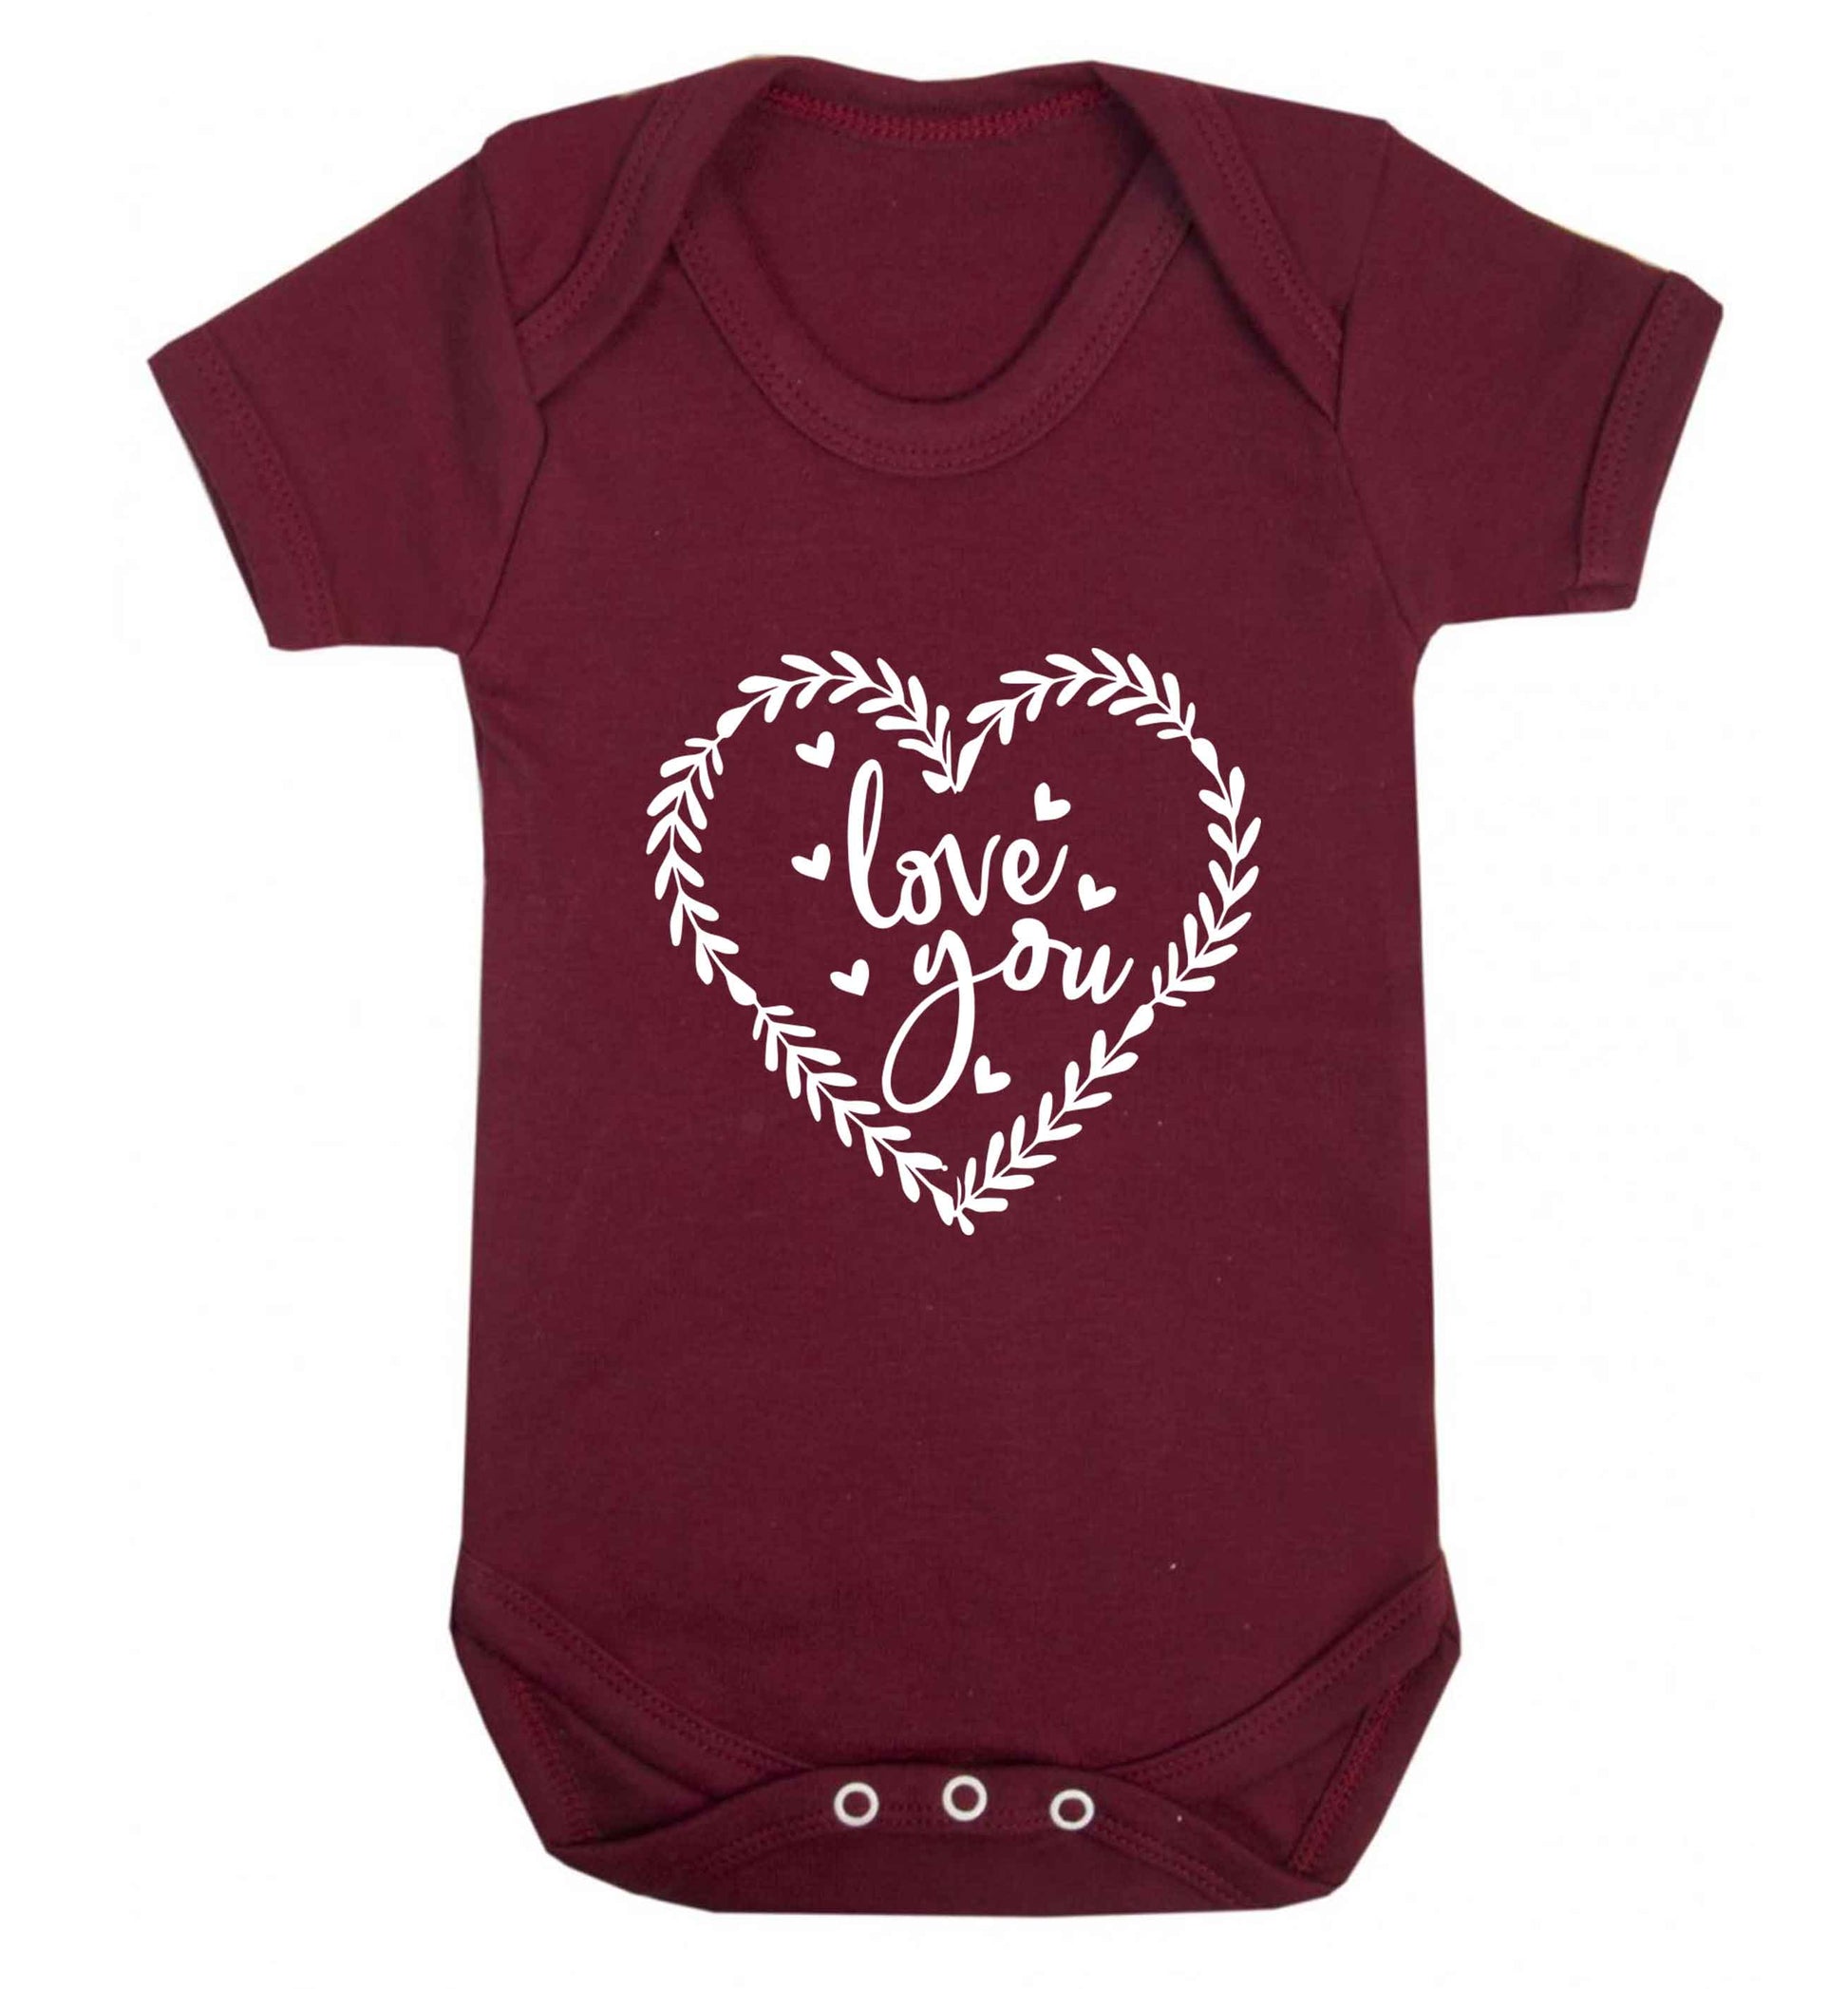 Love you baby vest maroon 18-24 months